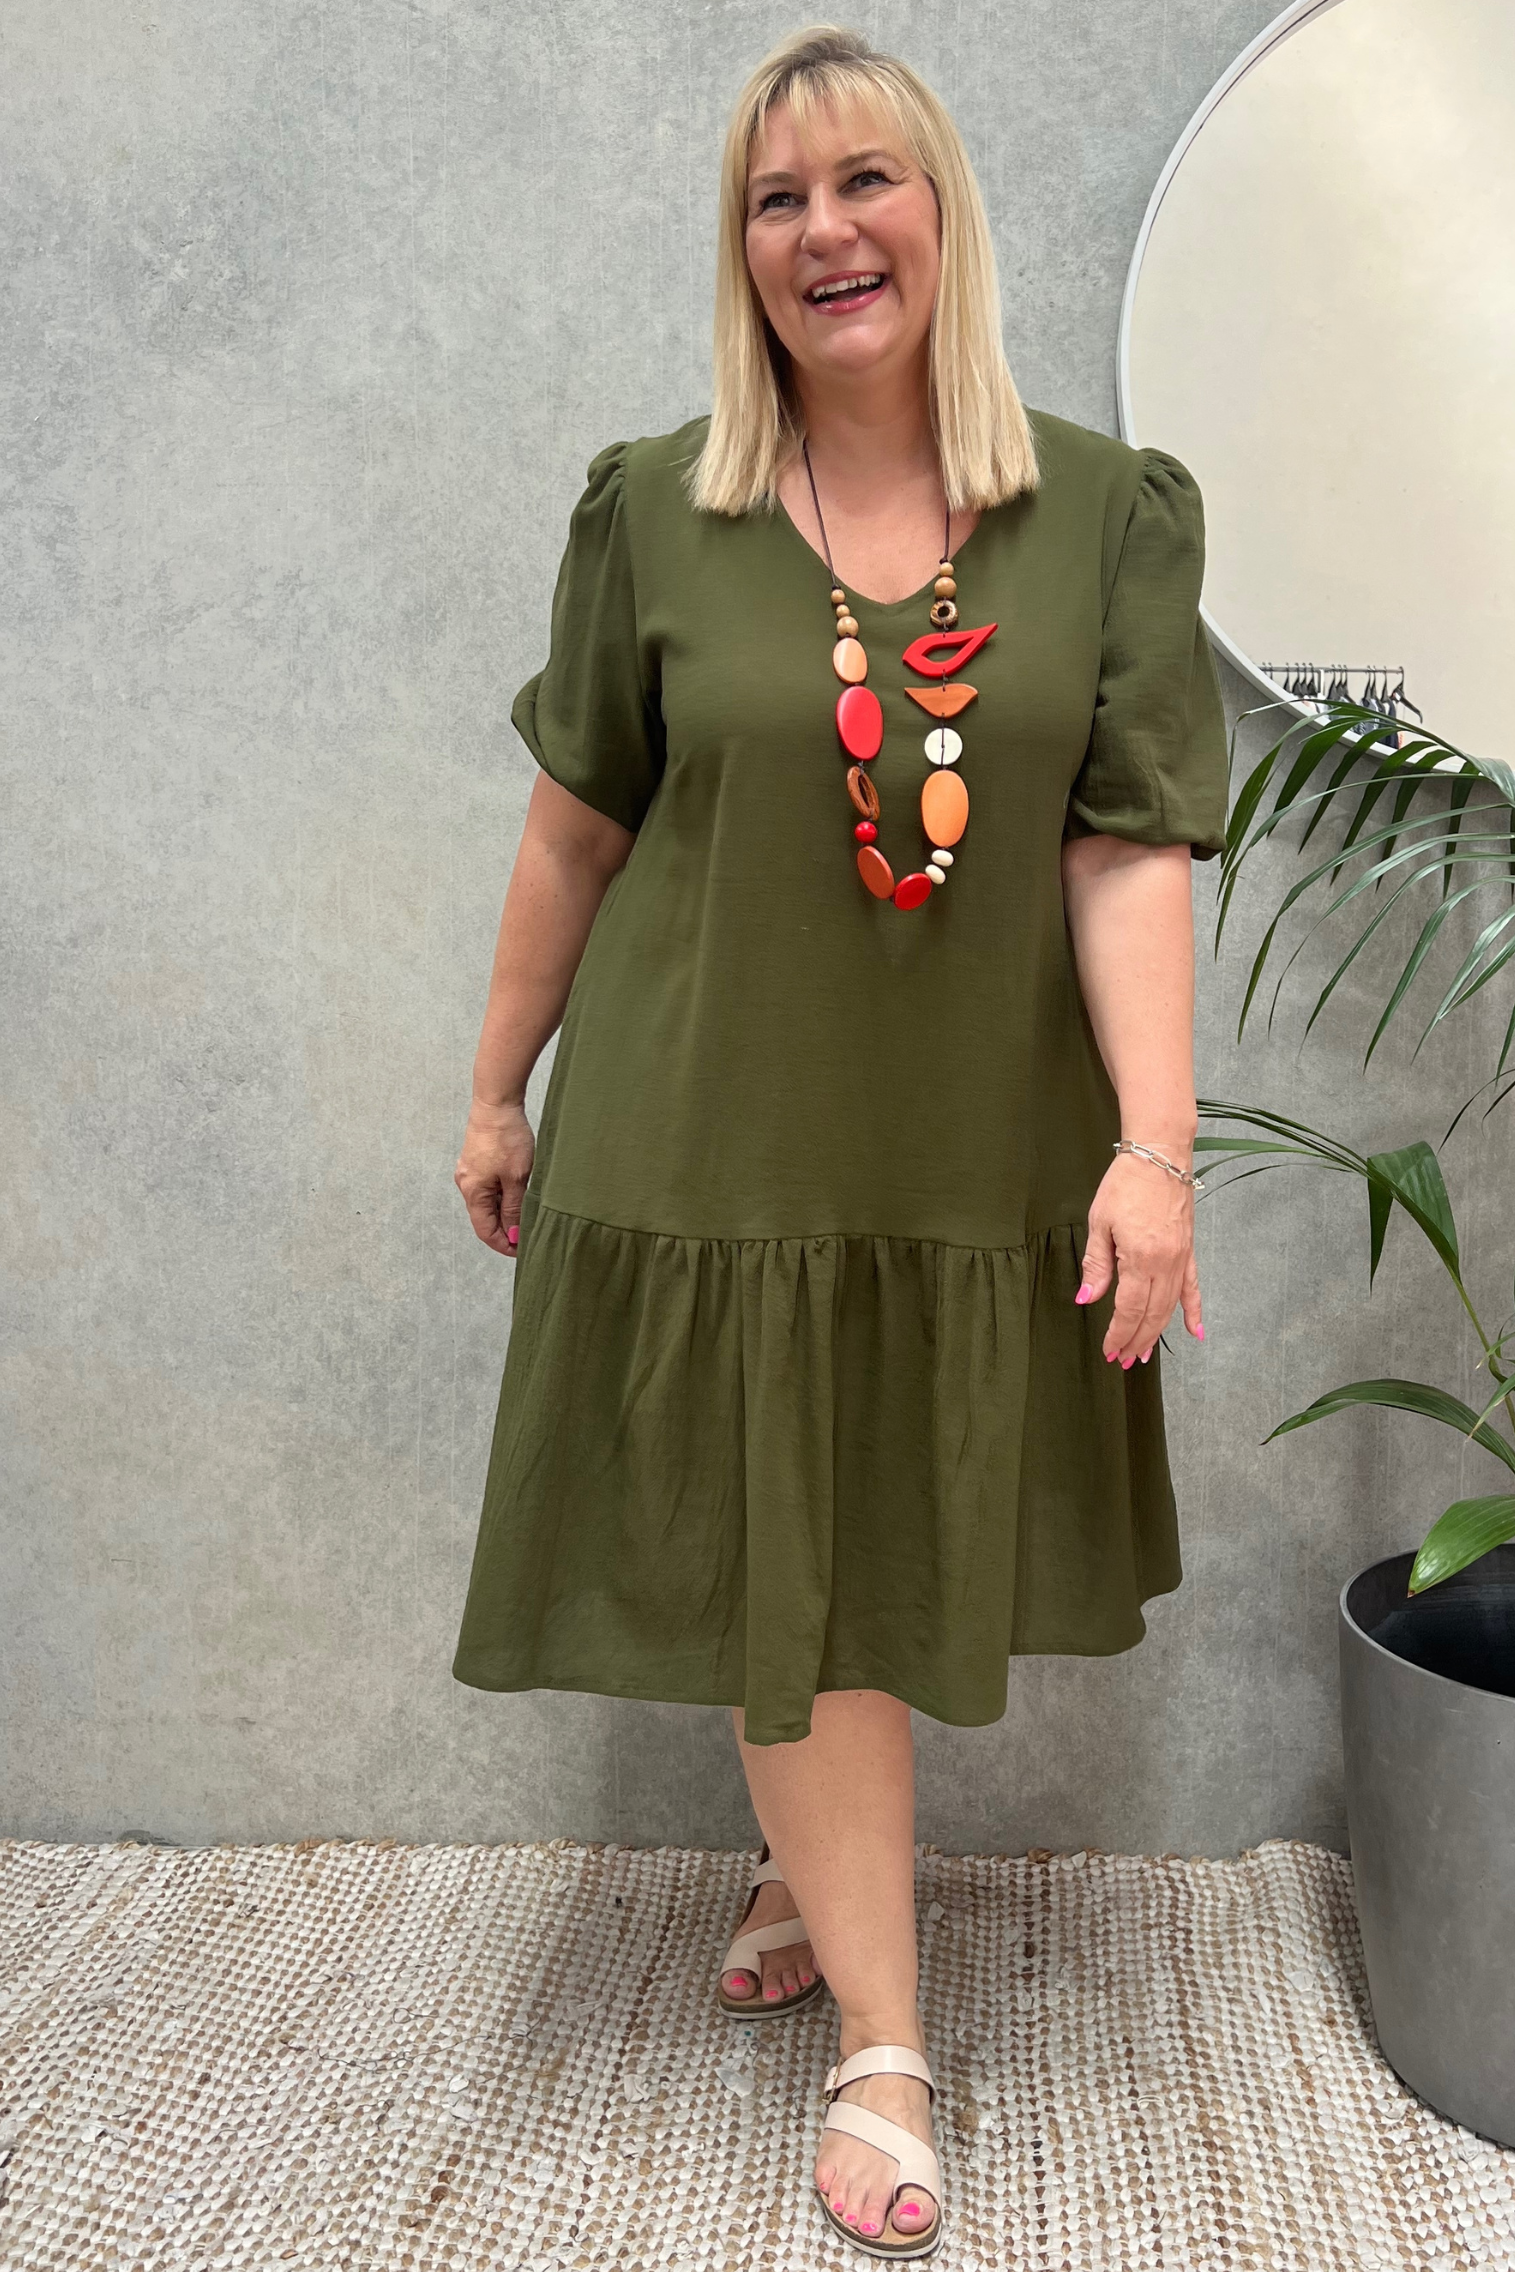 Kita Ku modelling a khaki cotton layer dress and wearing a red necklace in a retail  setting. 